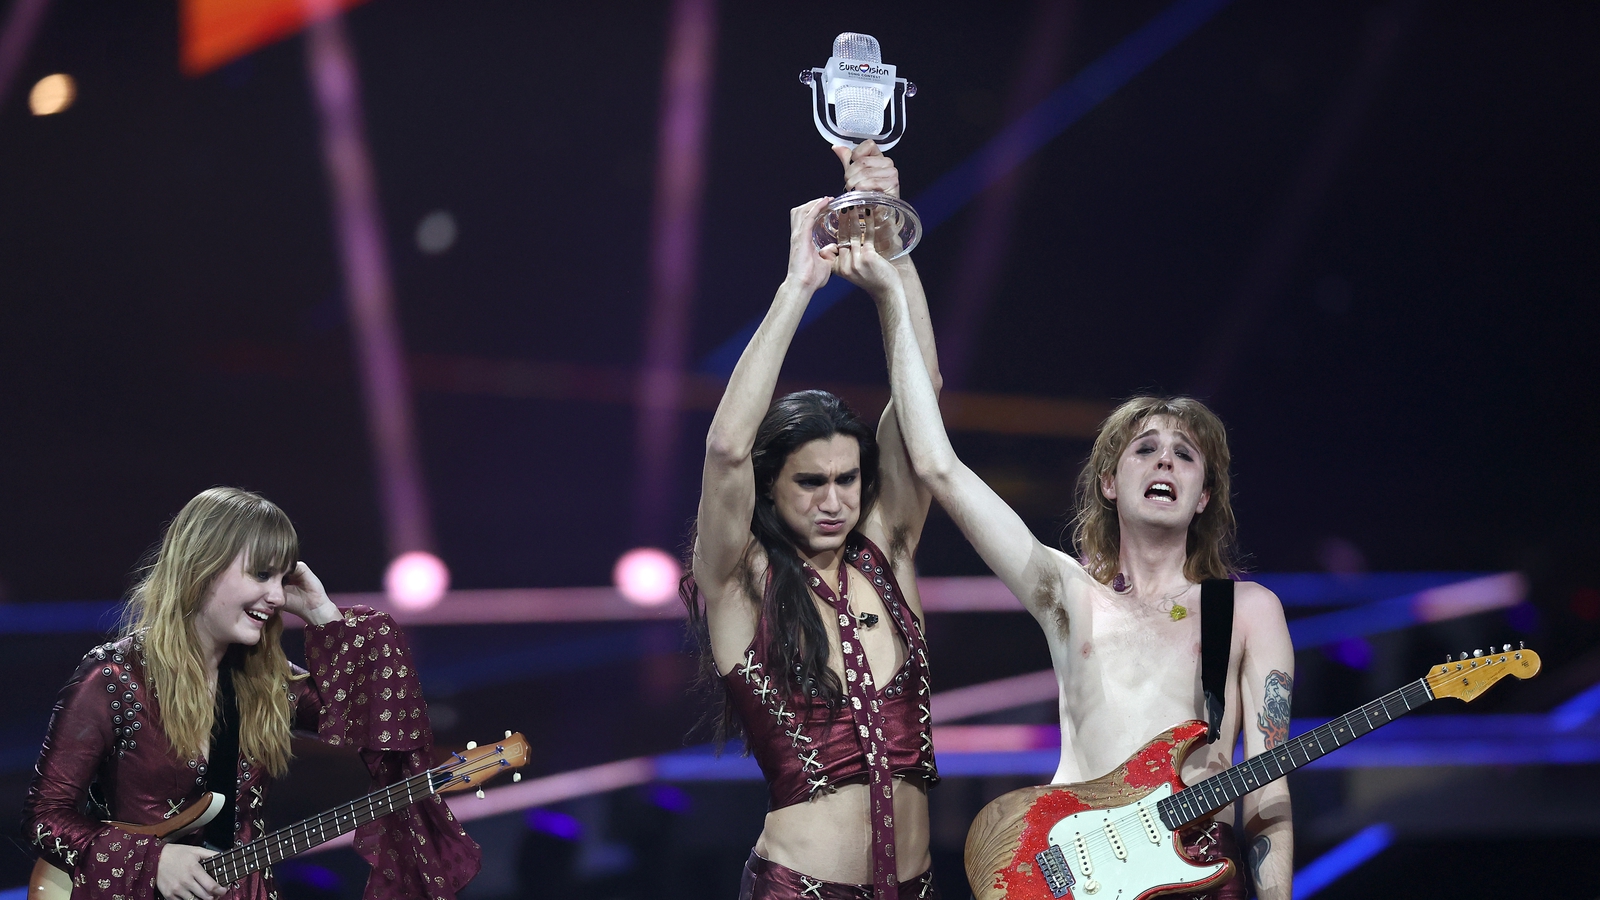 Hardrocking Italy wins the Eurovision Song Contest